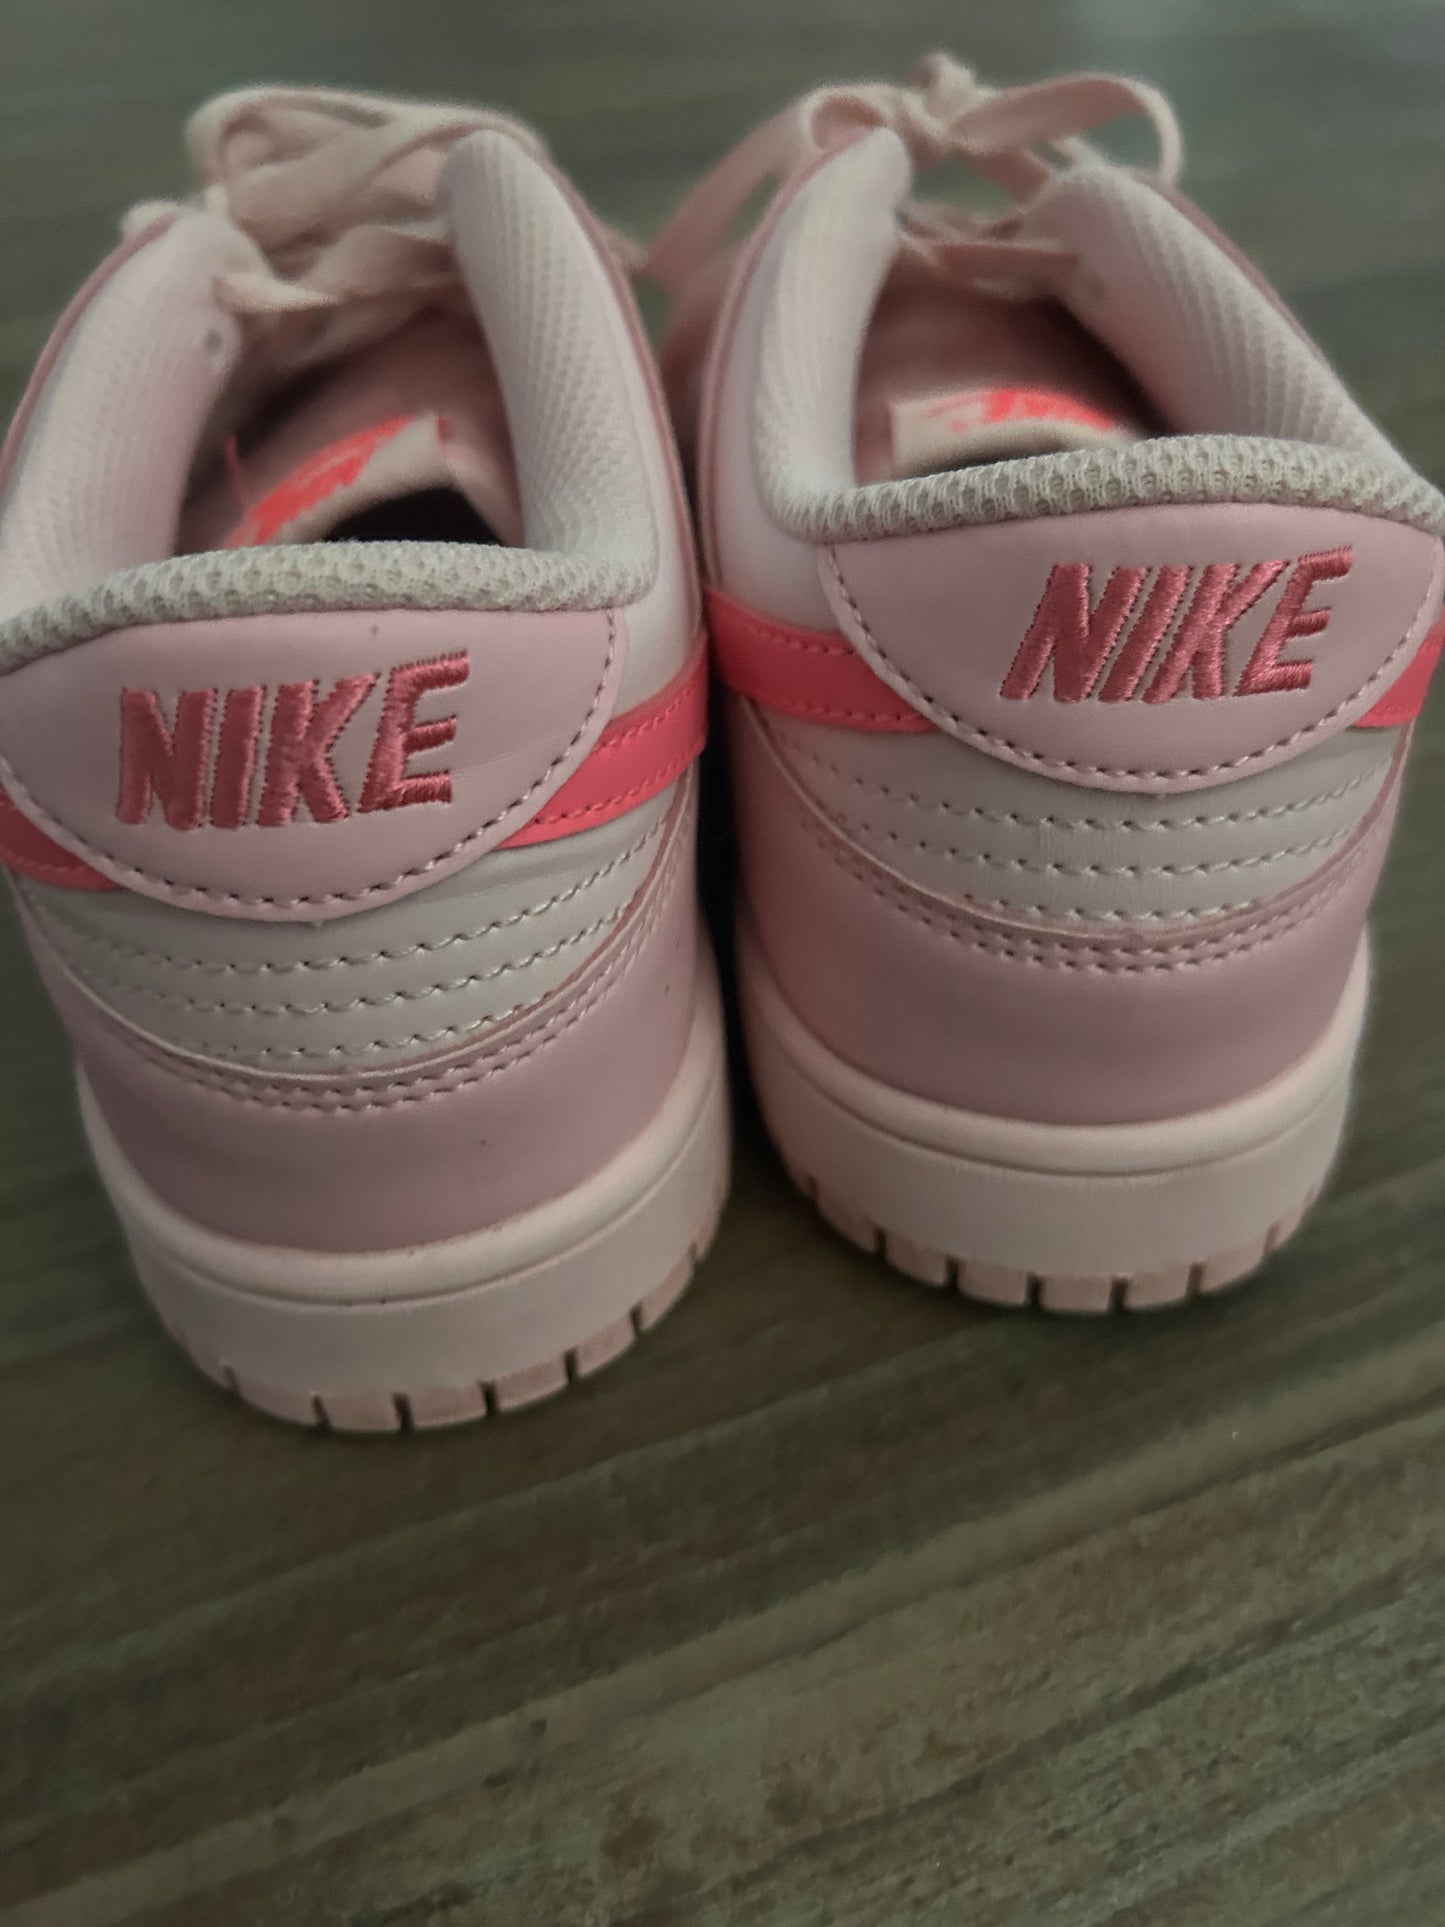 Women's Size 8 Nike Pink Shoes- Good Used Condition